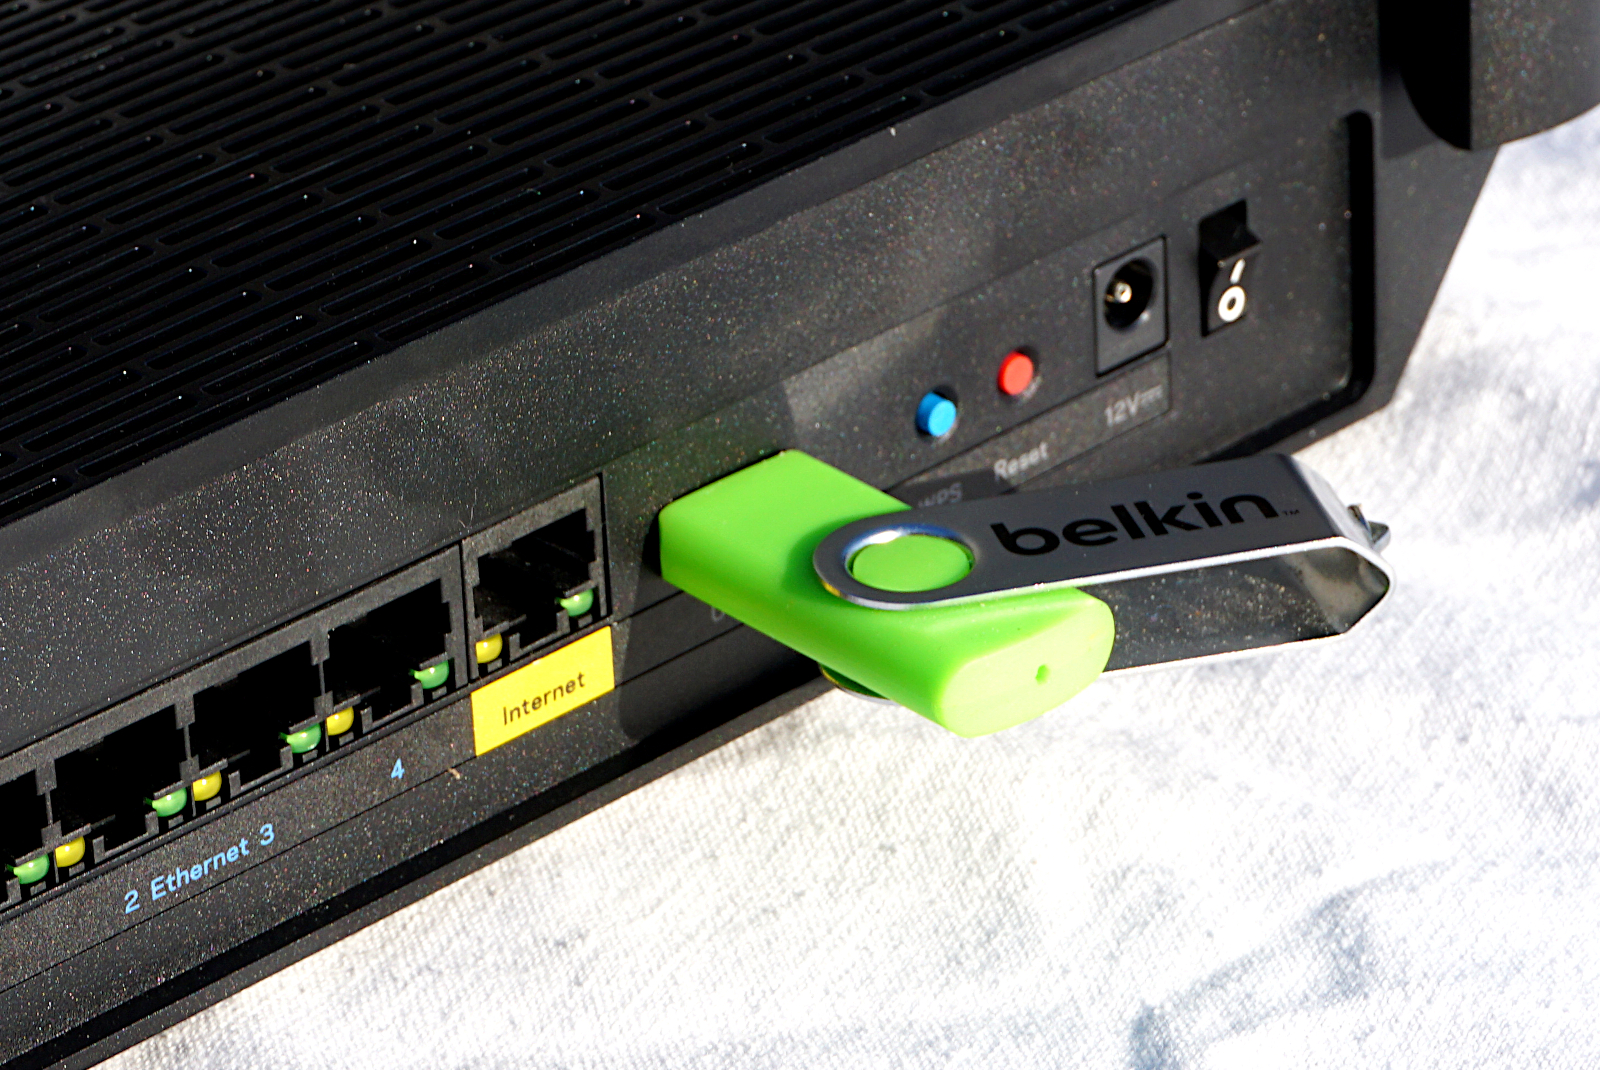 Images of USB stick in port of Linksys Hydra Pro 6 router